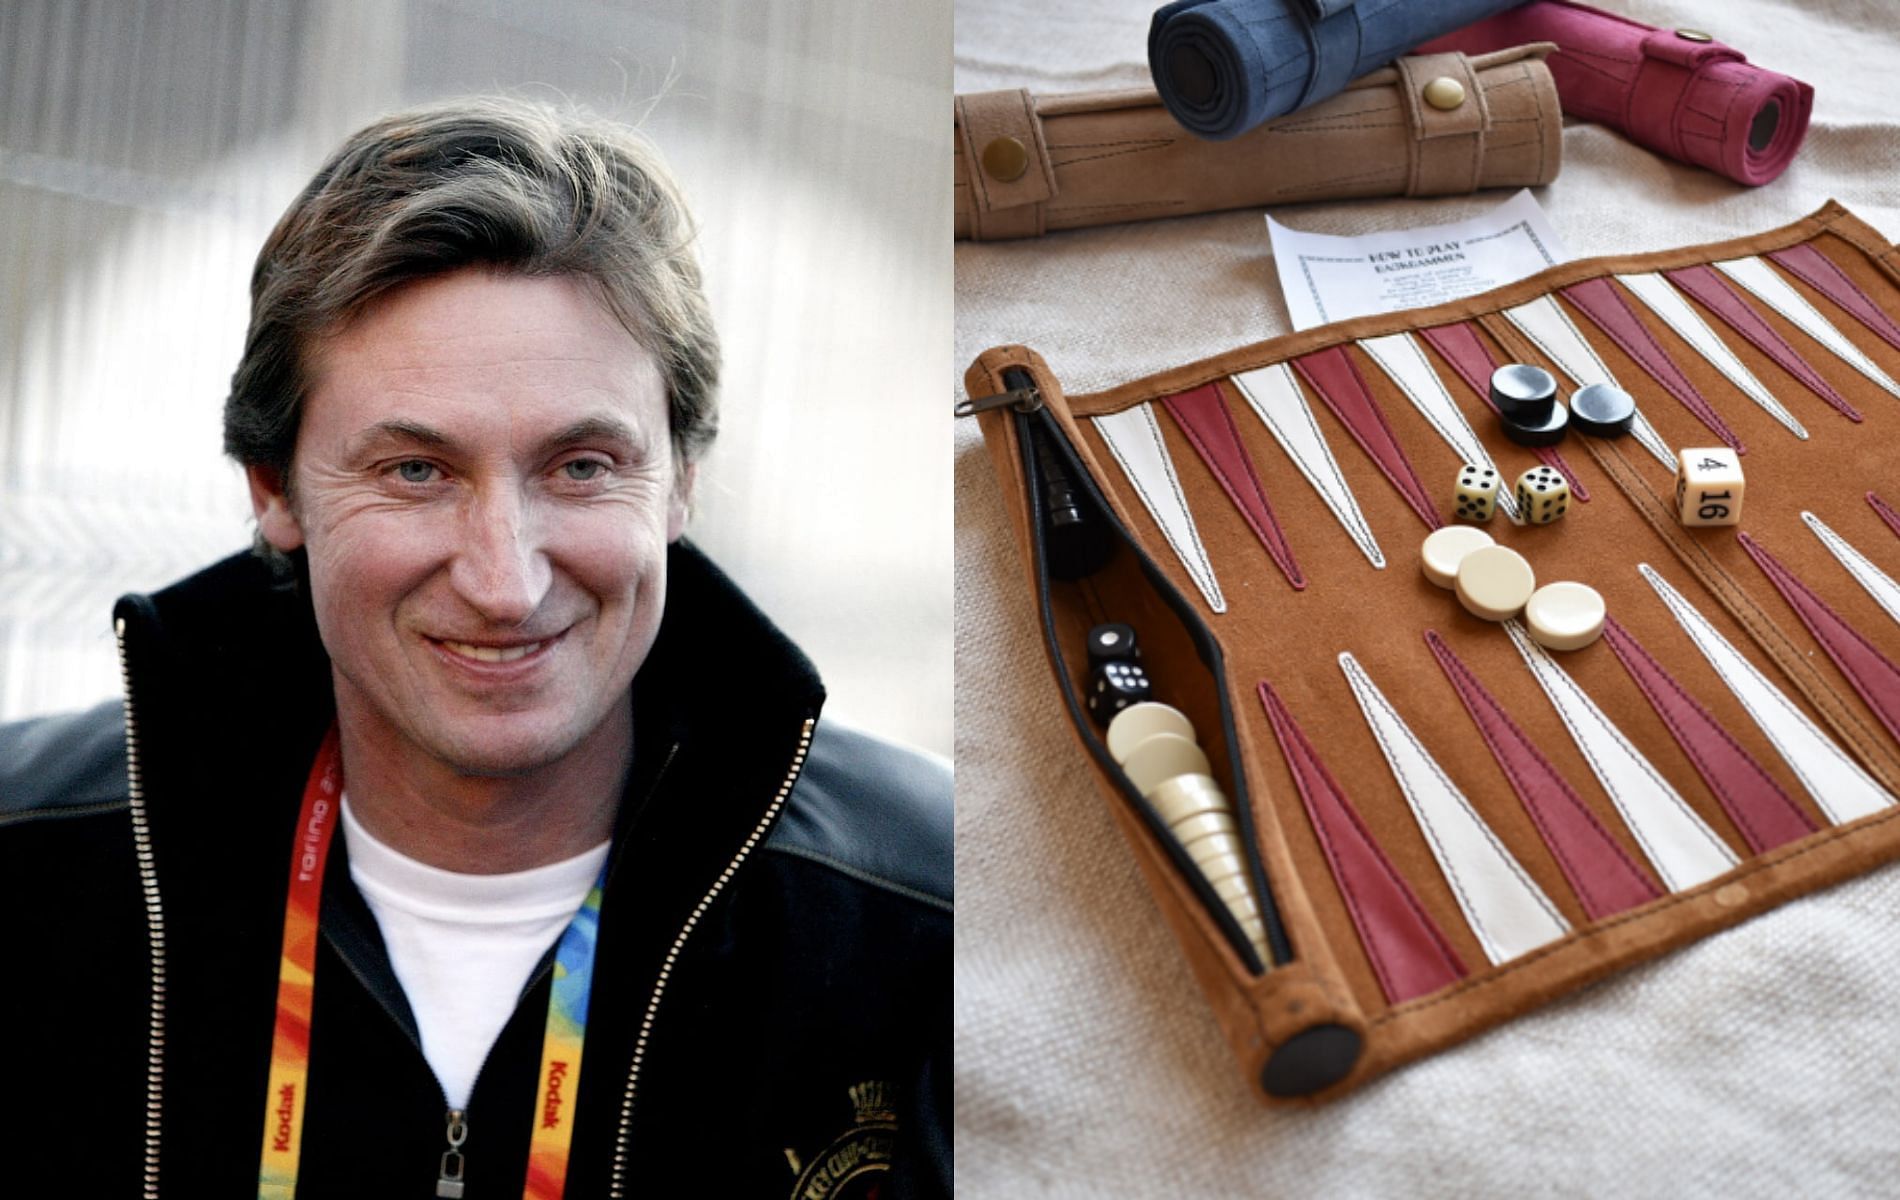 When Wayne Gretzky almost played for the Winnipeg Jets based on the result of a game of backgammon